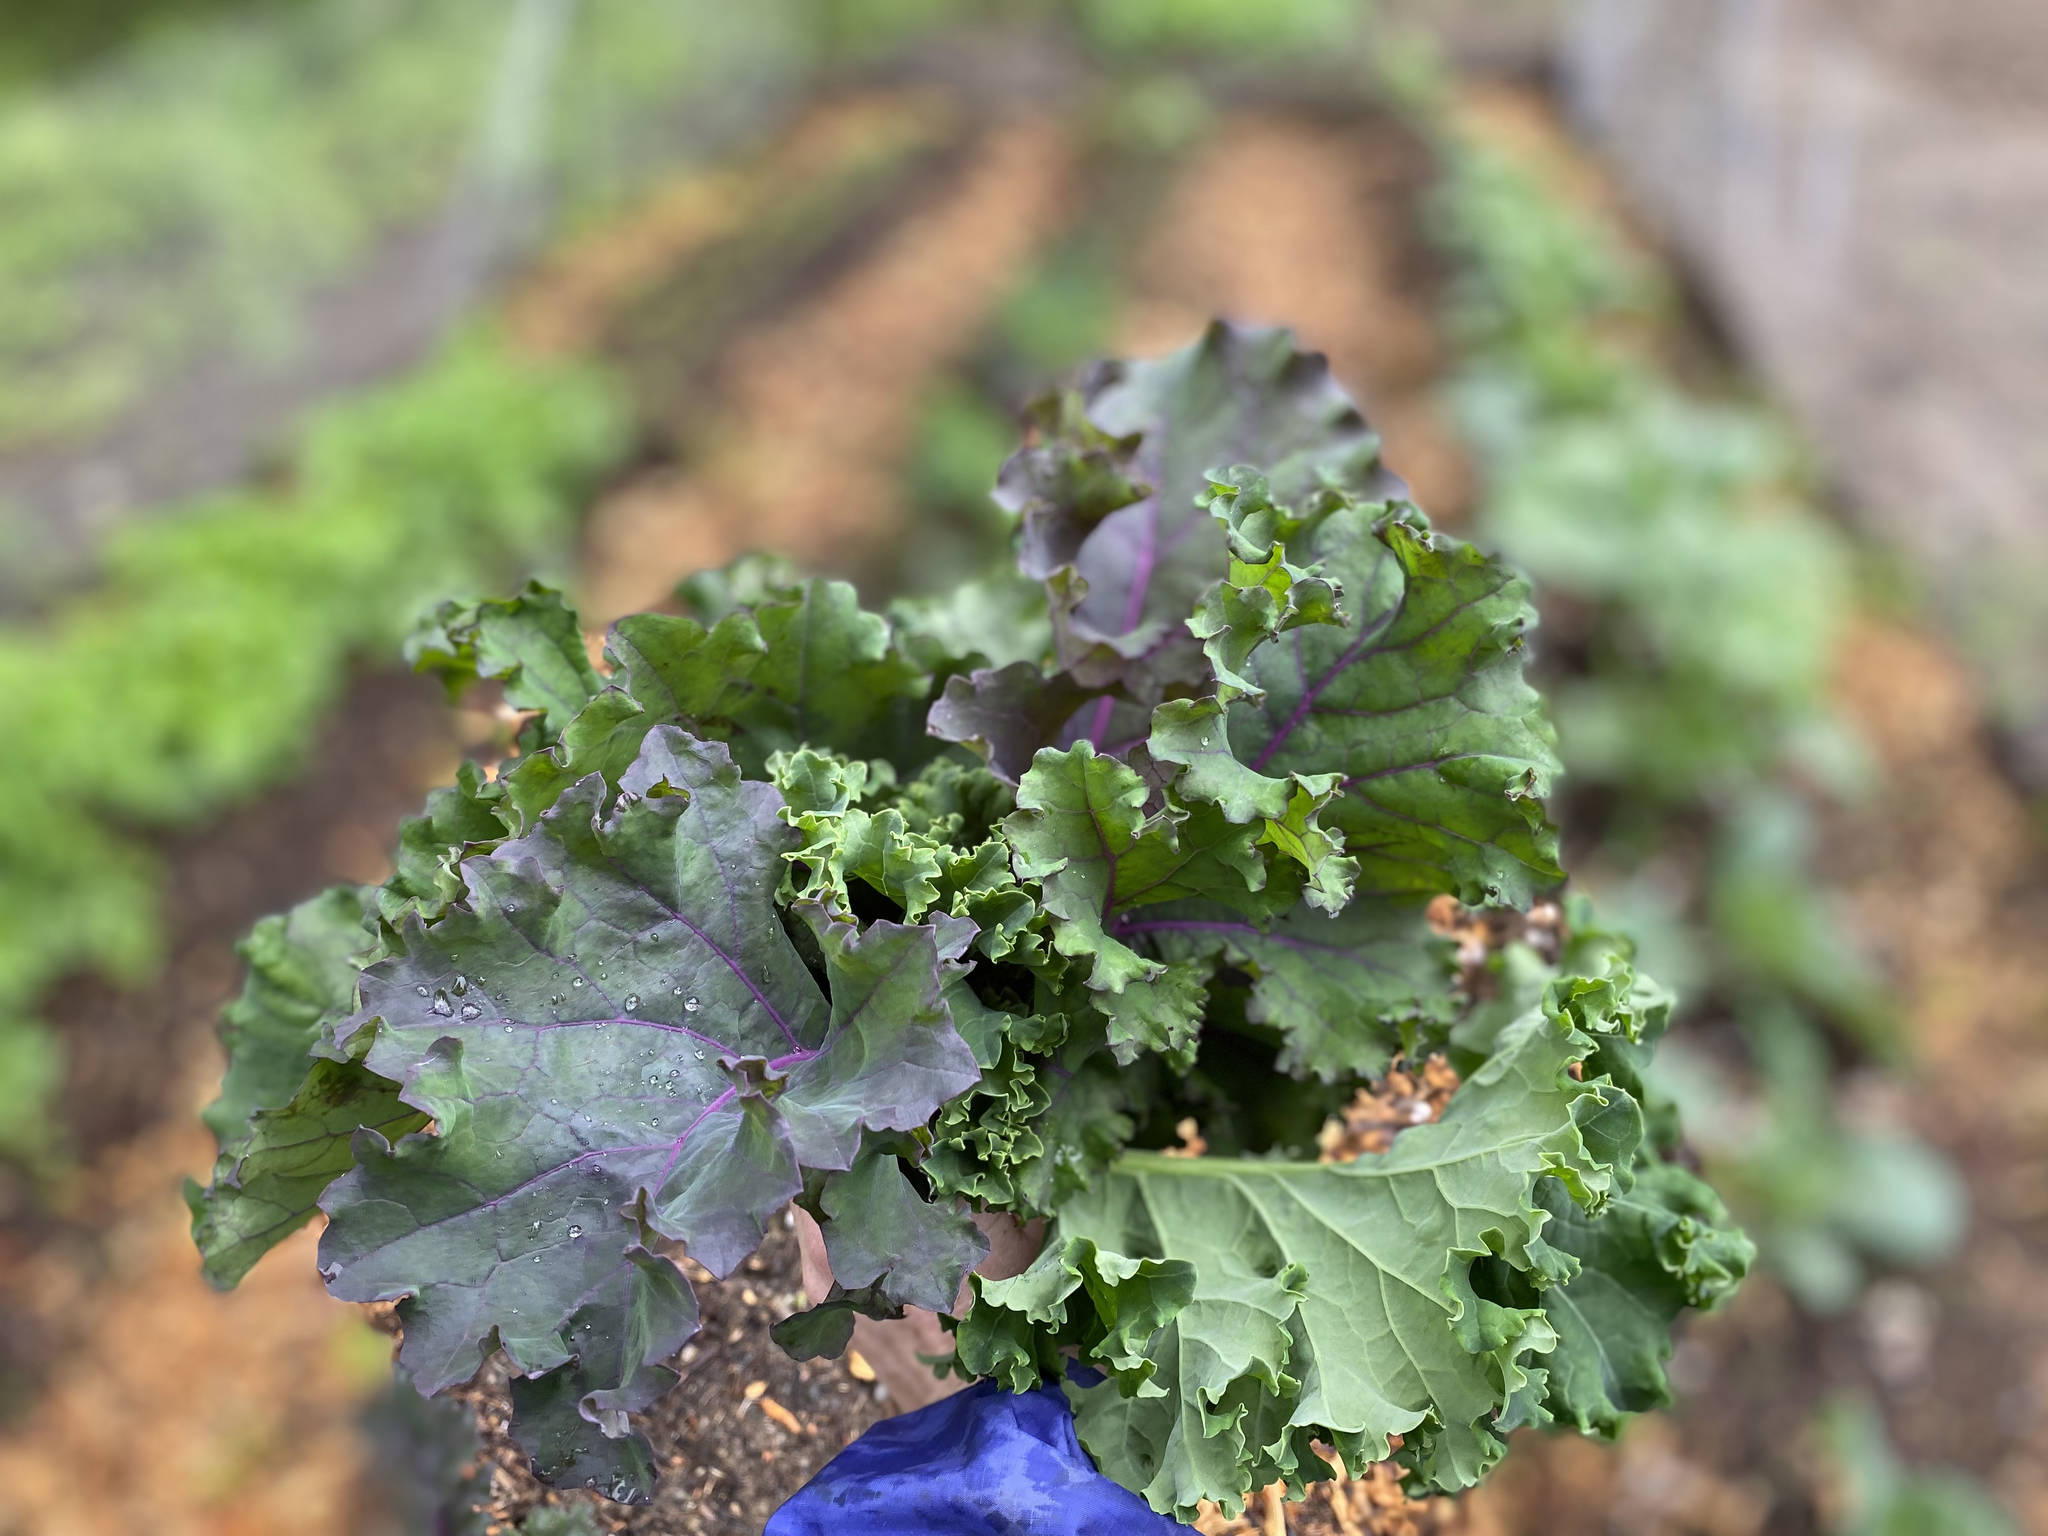 A handful of kale is harvested in Nikiski, Alaska, on July 10, 2021. (Photograph by Tressa Dale/Peninsula Clarion)